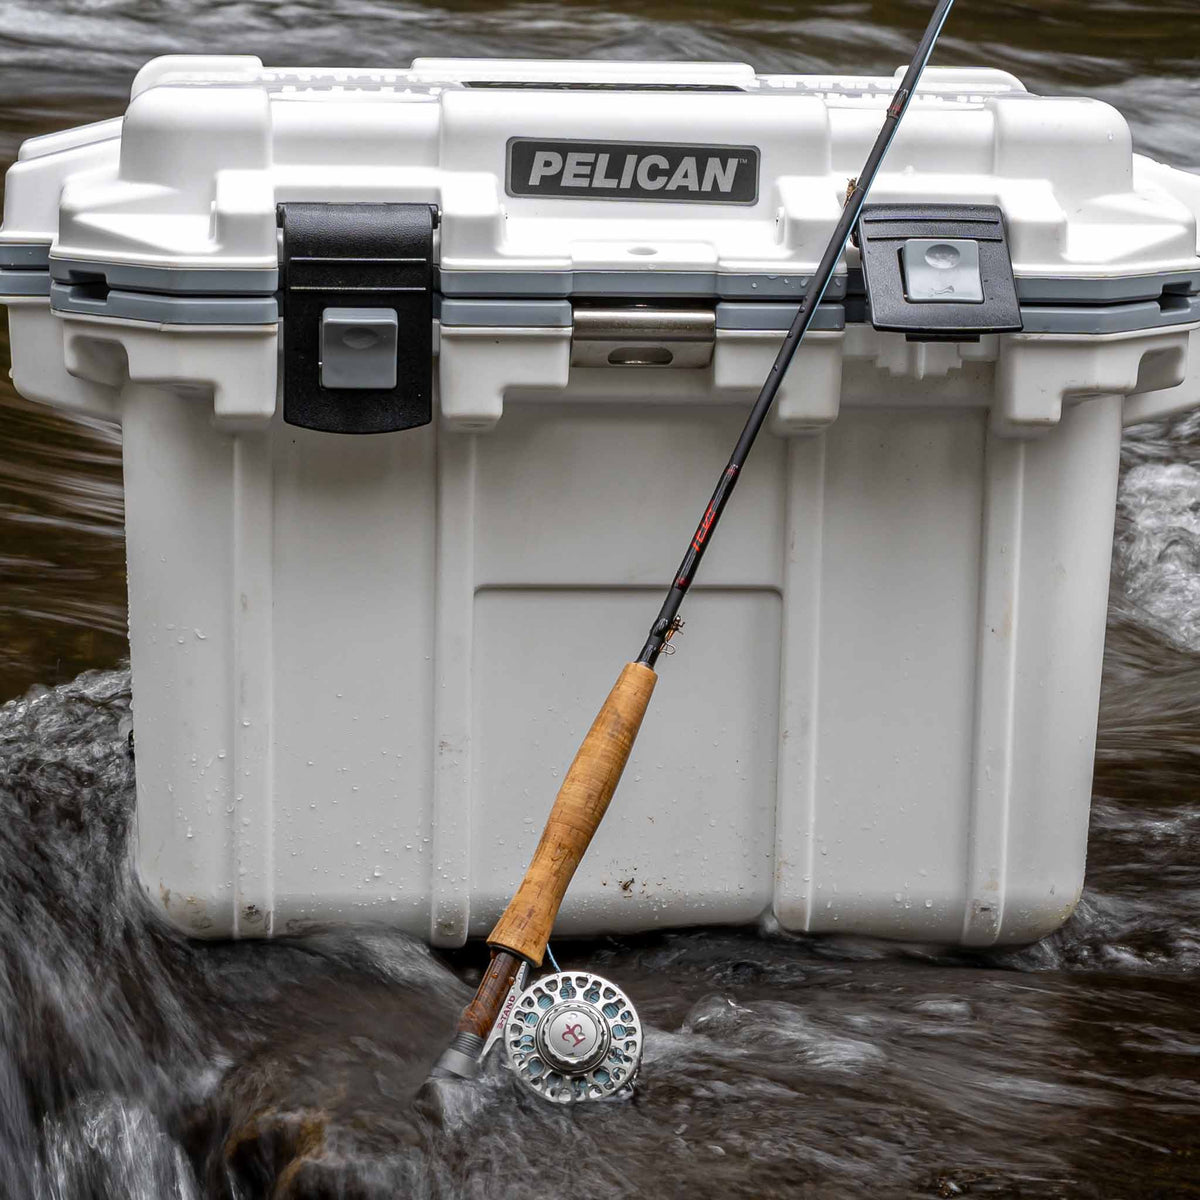 30Q-1-WHTGRY 30QT Pelican Elite Cooler in stream with fishing rod